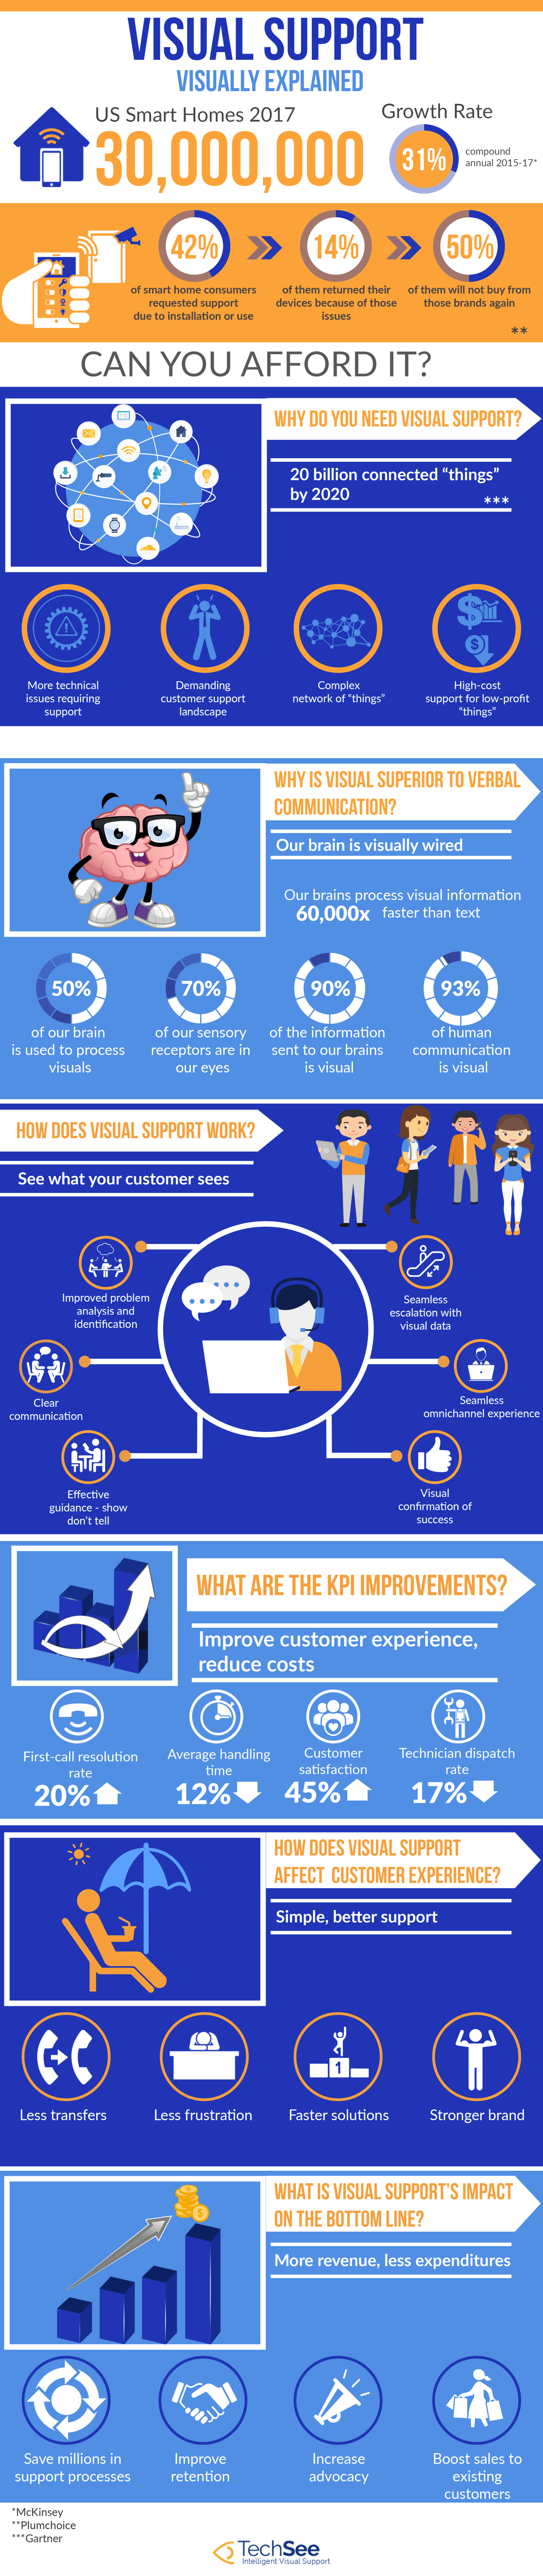 Visual Support Infographic